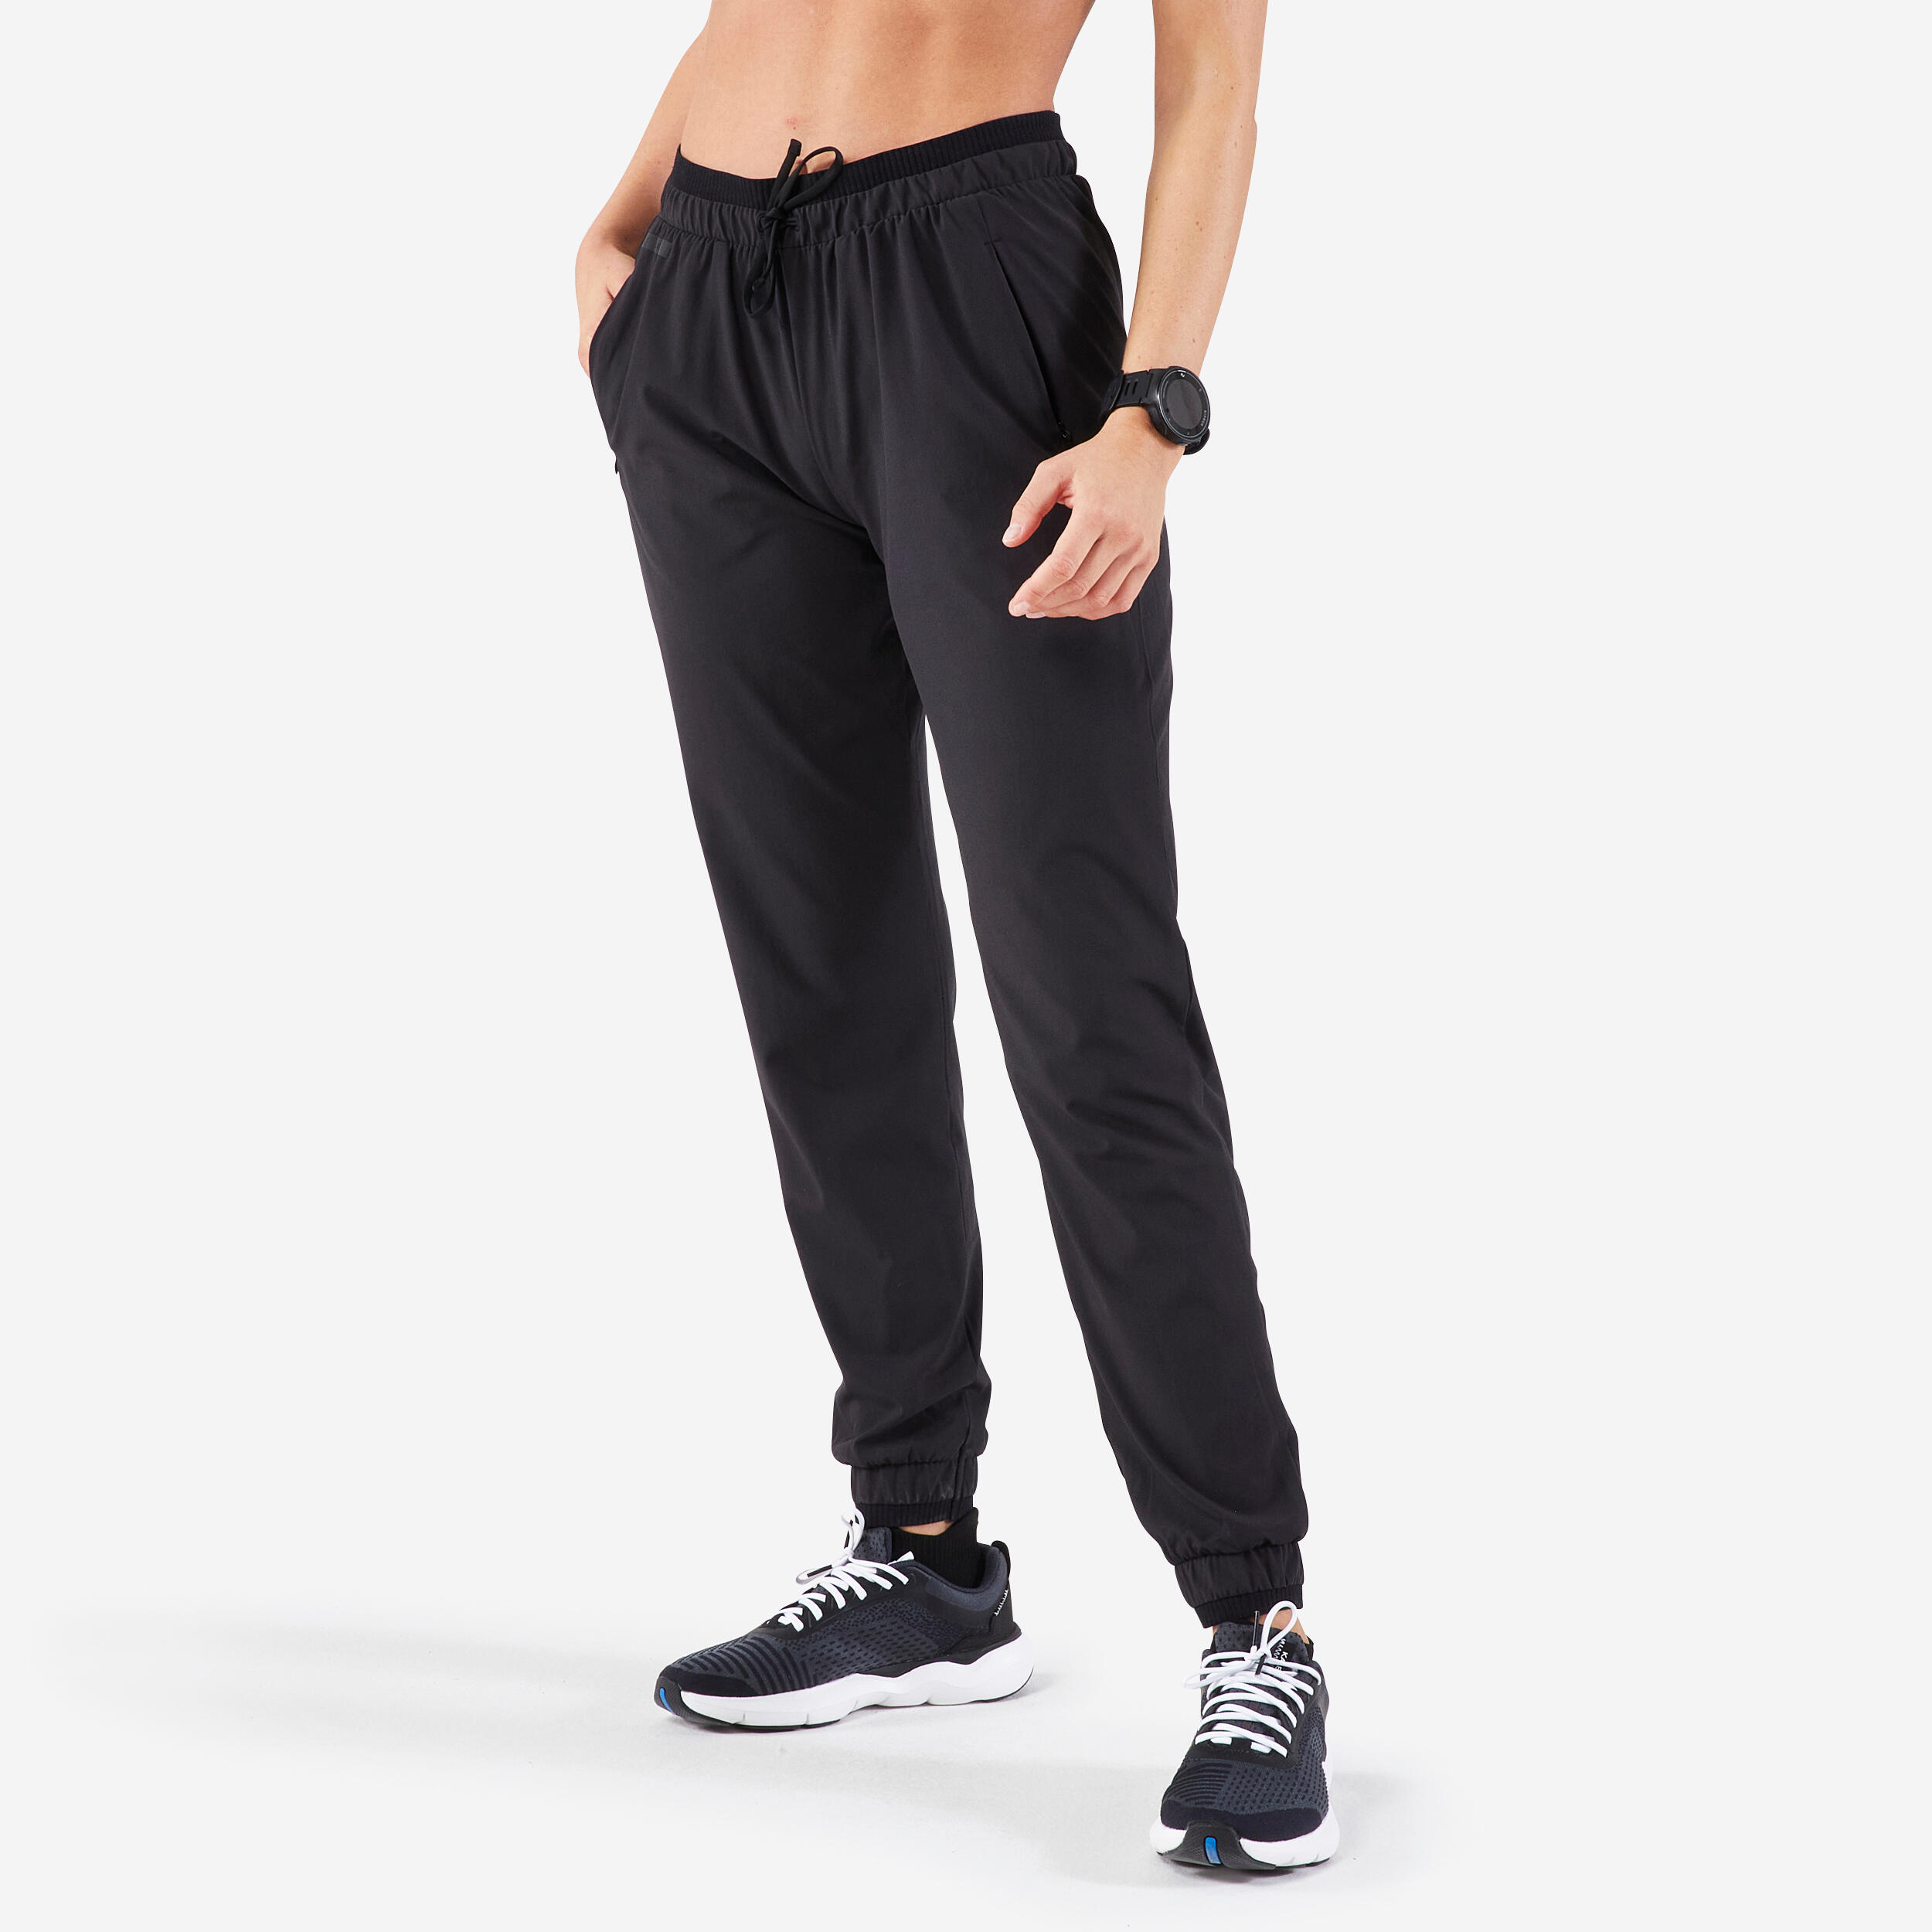 Women's Jogging Running Breathable Trousers Dry - black 1/7